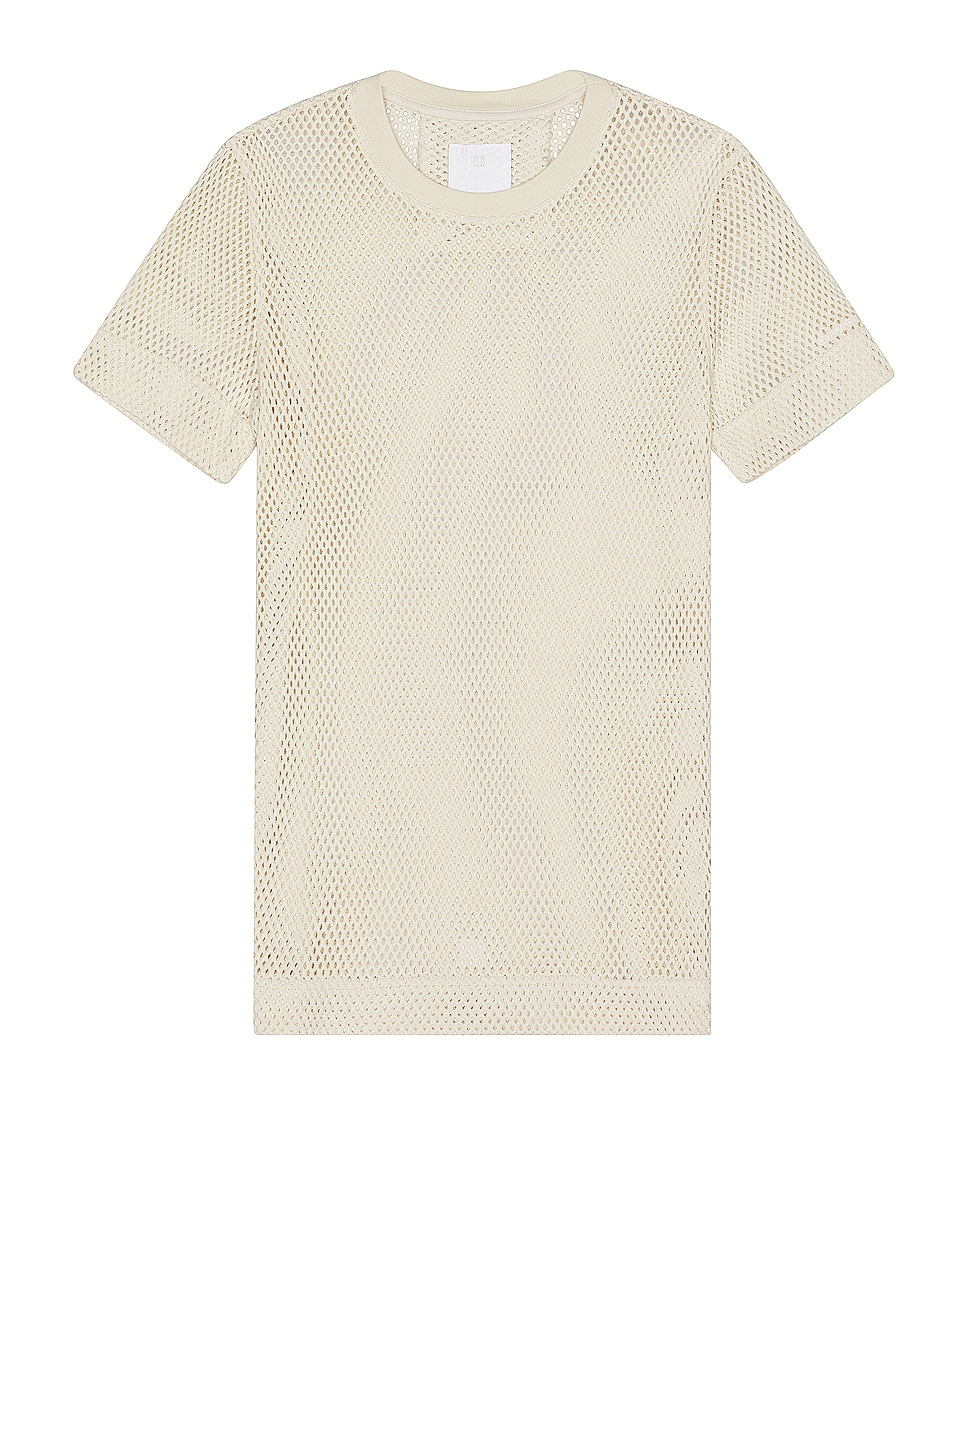 Image 1 of Givenchy Xslim Short Sleeve T-shirt in Off White